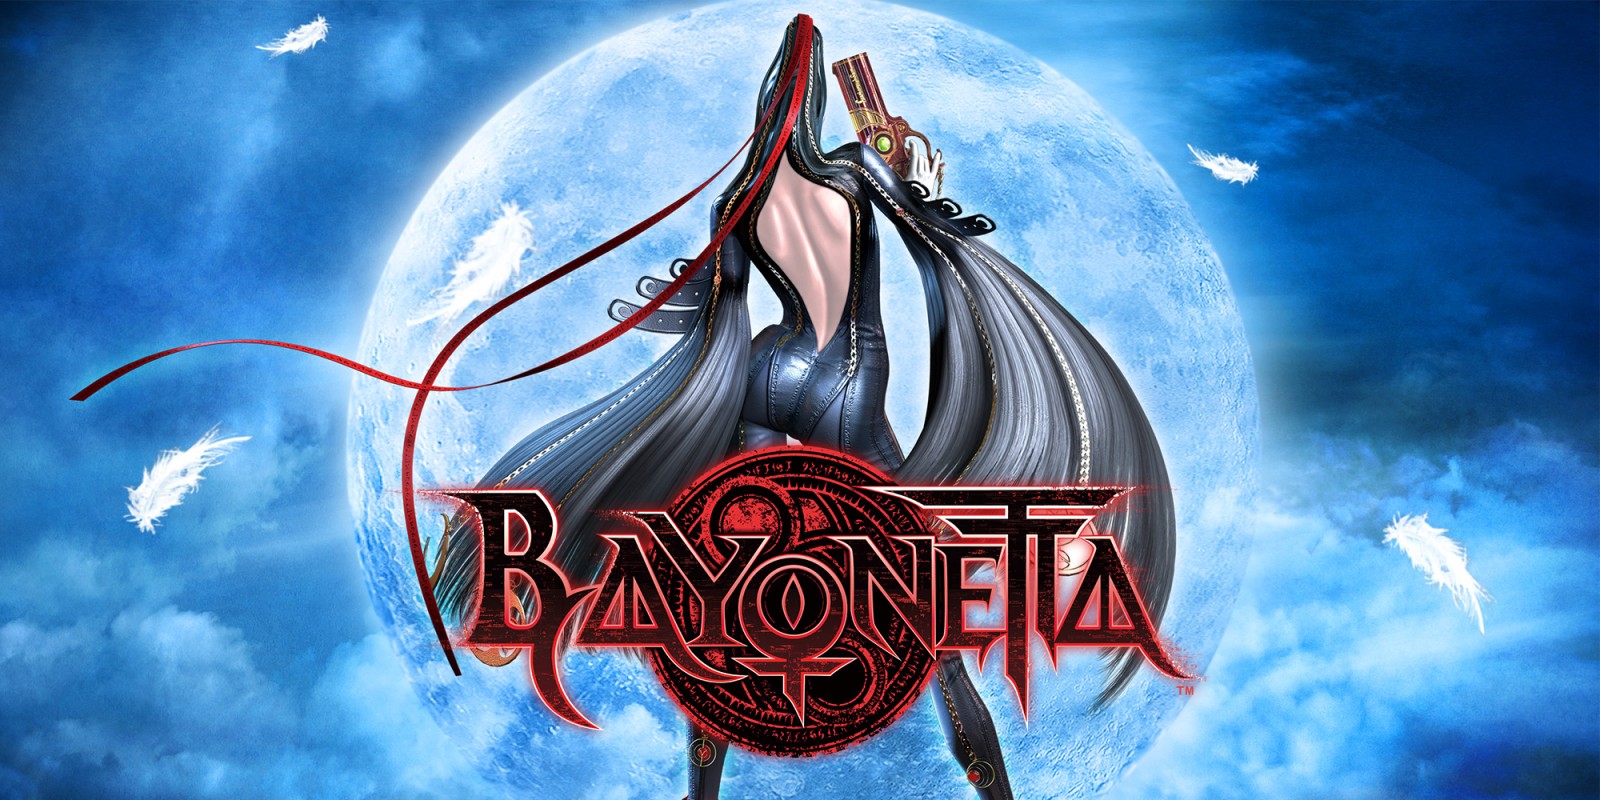 bayonetta 2 switch physical download